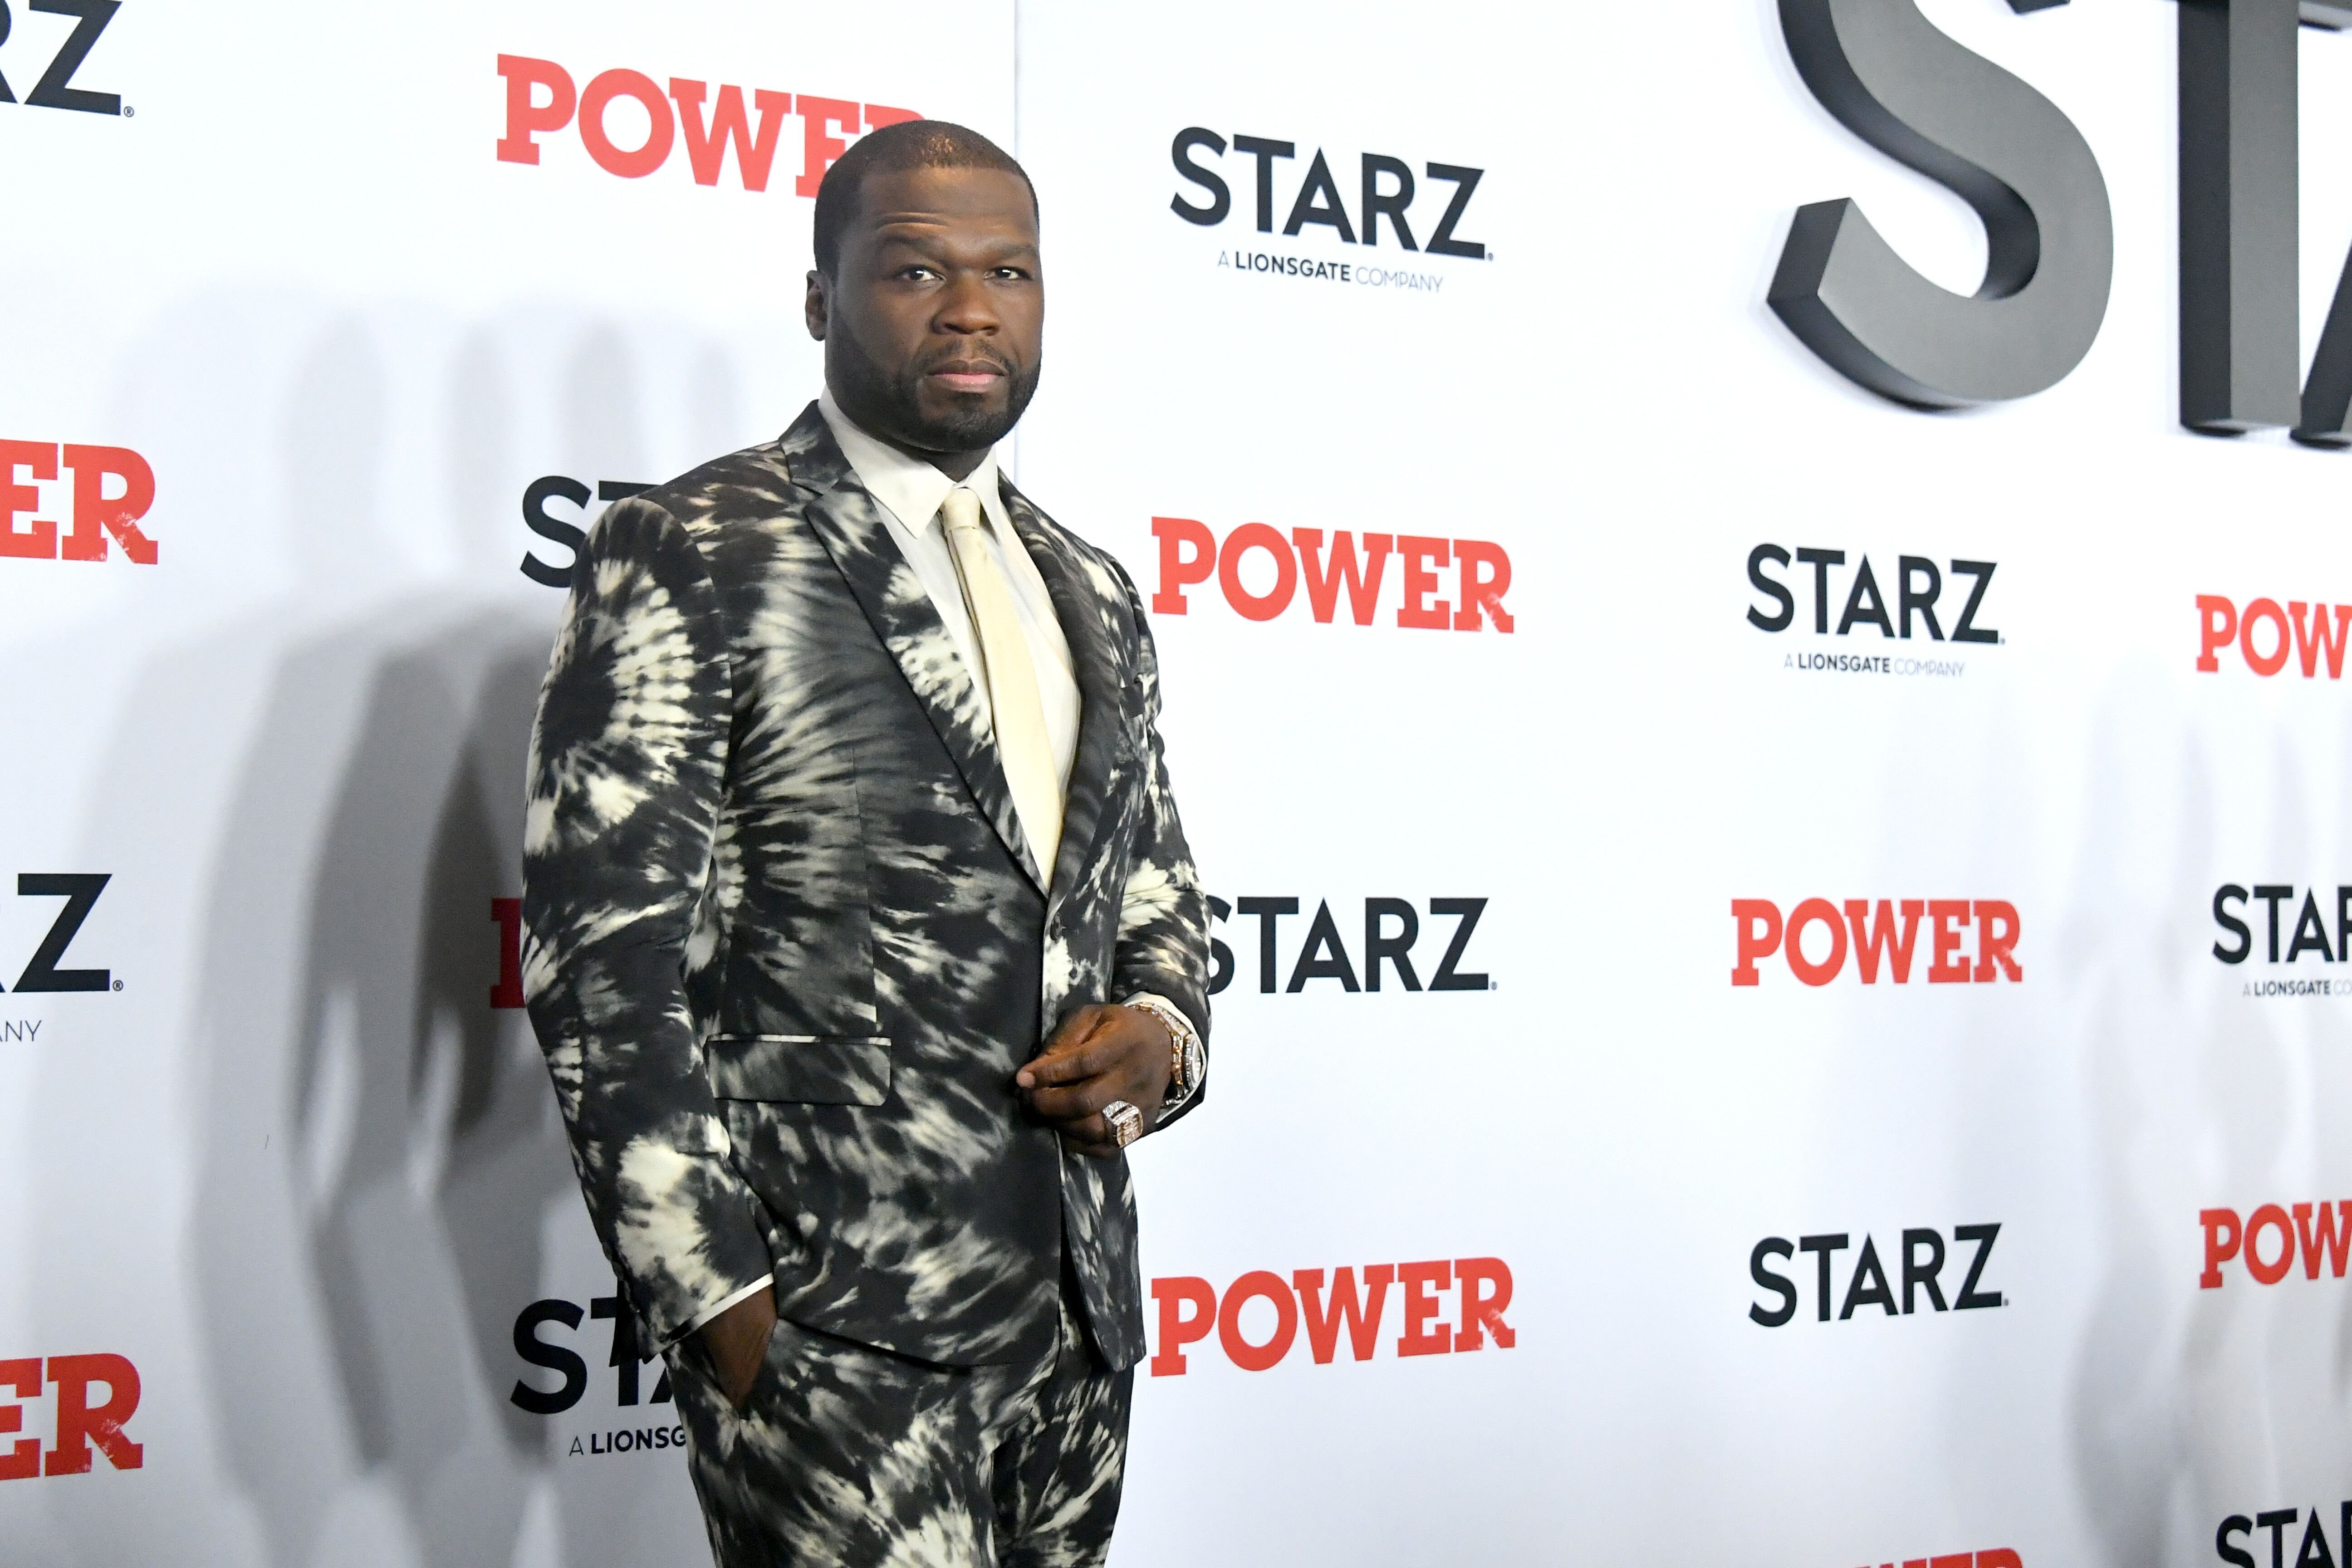 Curtis "50 Cent" Jackson attends the "Power" Final Season World Premiere at The Hulu Theater at Madison Square Garden on August 20, 2019 in New York City. | Source: Getty Images